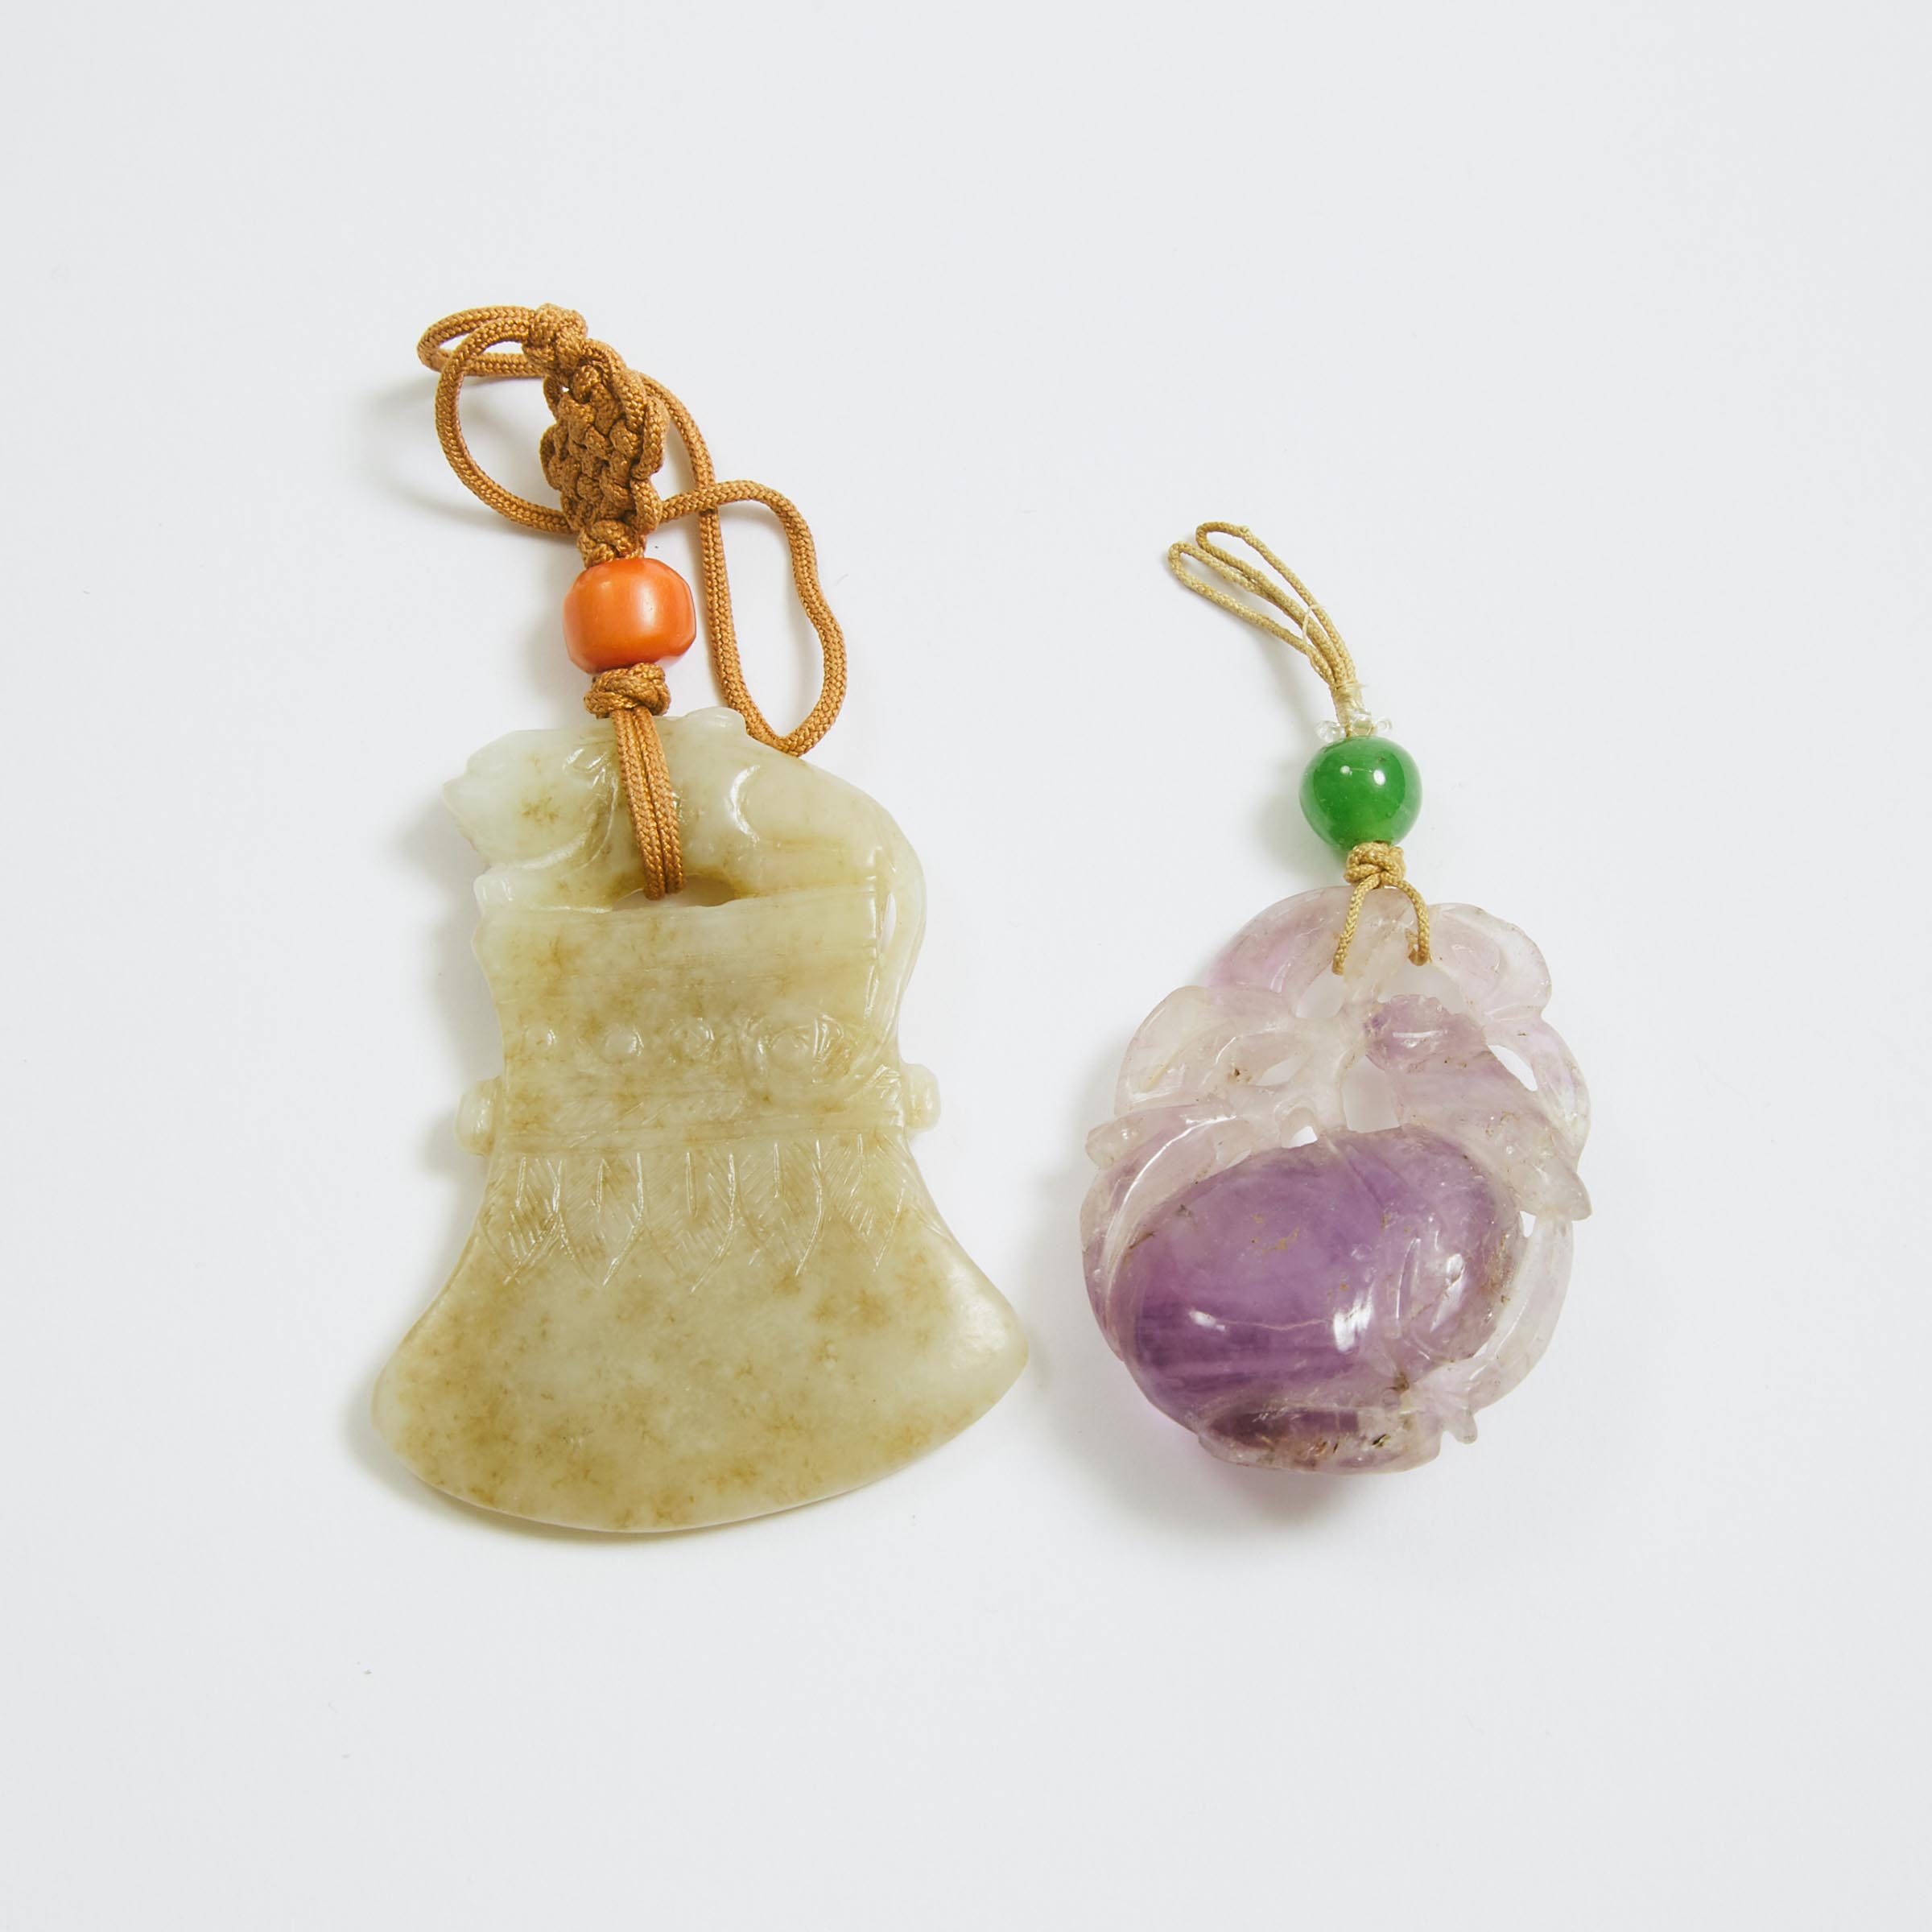 A White and Russet Jade Axe-Form Pendant, Together With an Amethyst 'Magpie and Peach' Pendant, Ming/Qing Dynasty